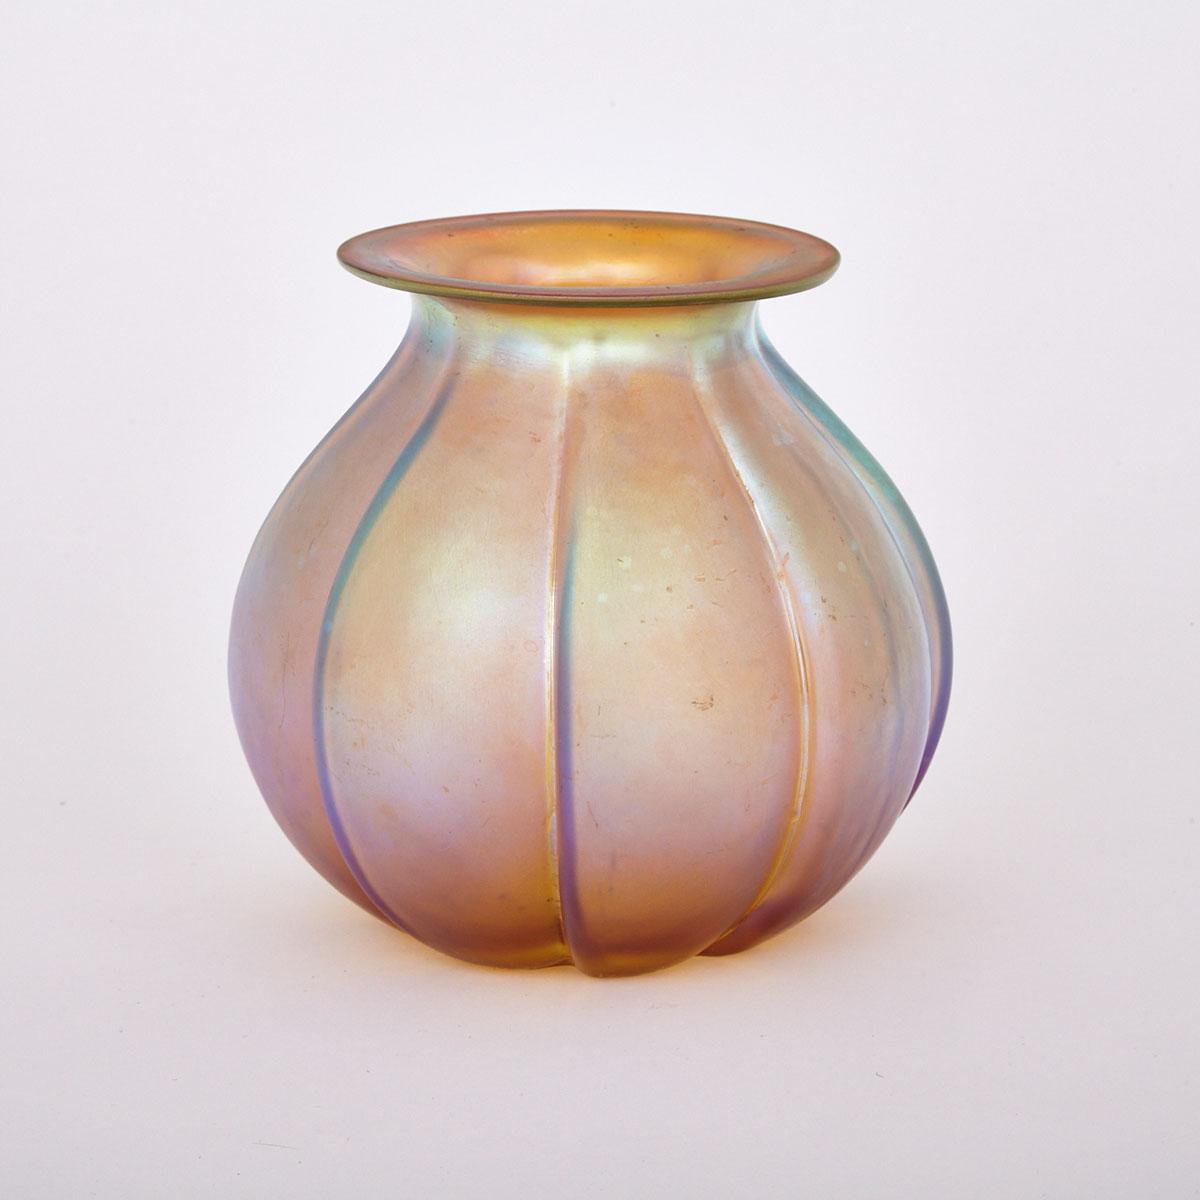 Iridescent Glass Vase, probably American, early 20th century